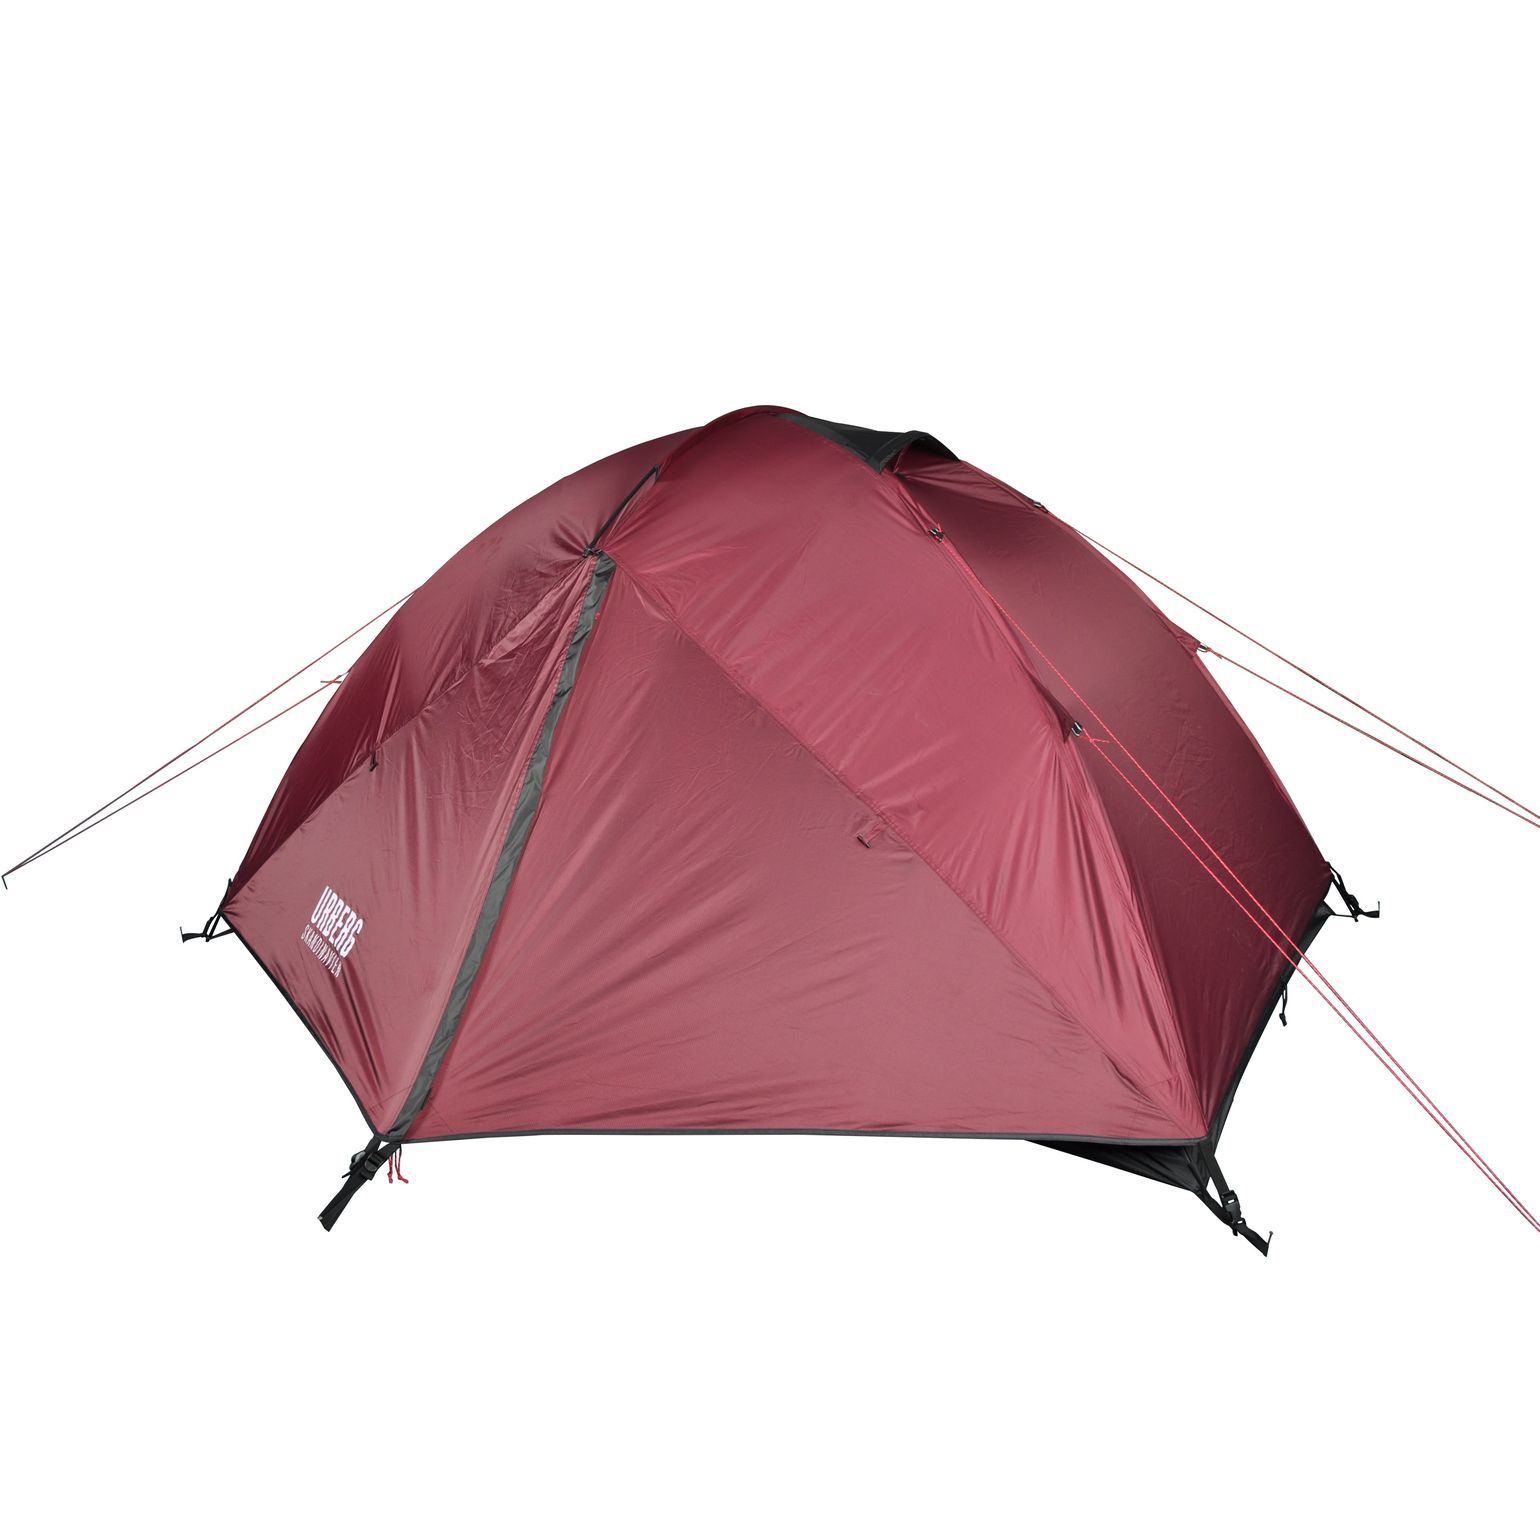 2-person Dome Tent G3 Windsor Wine